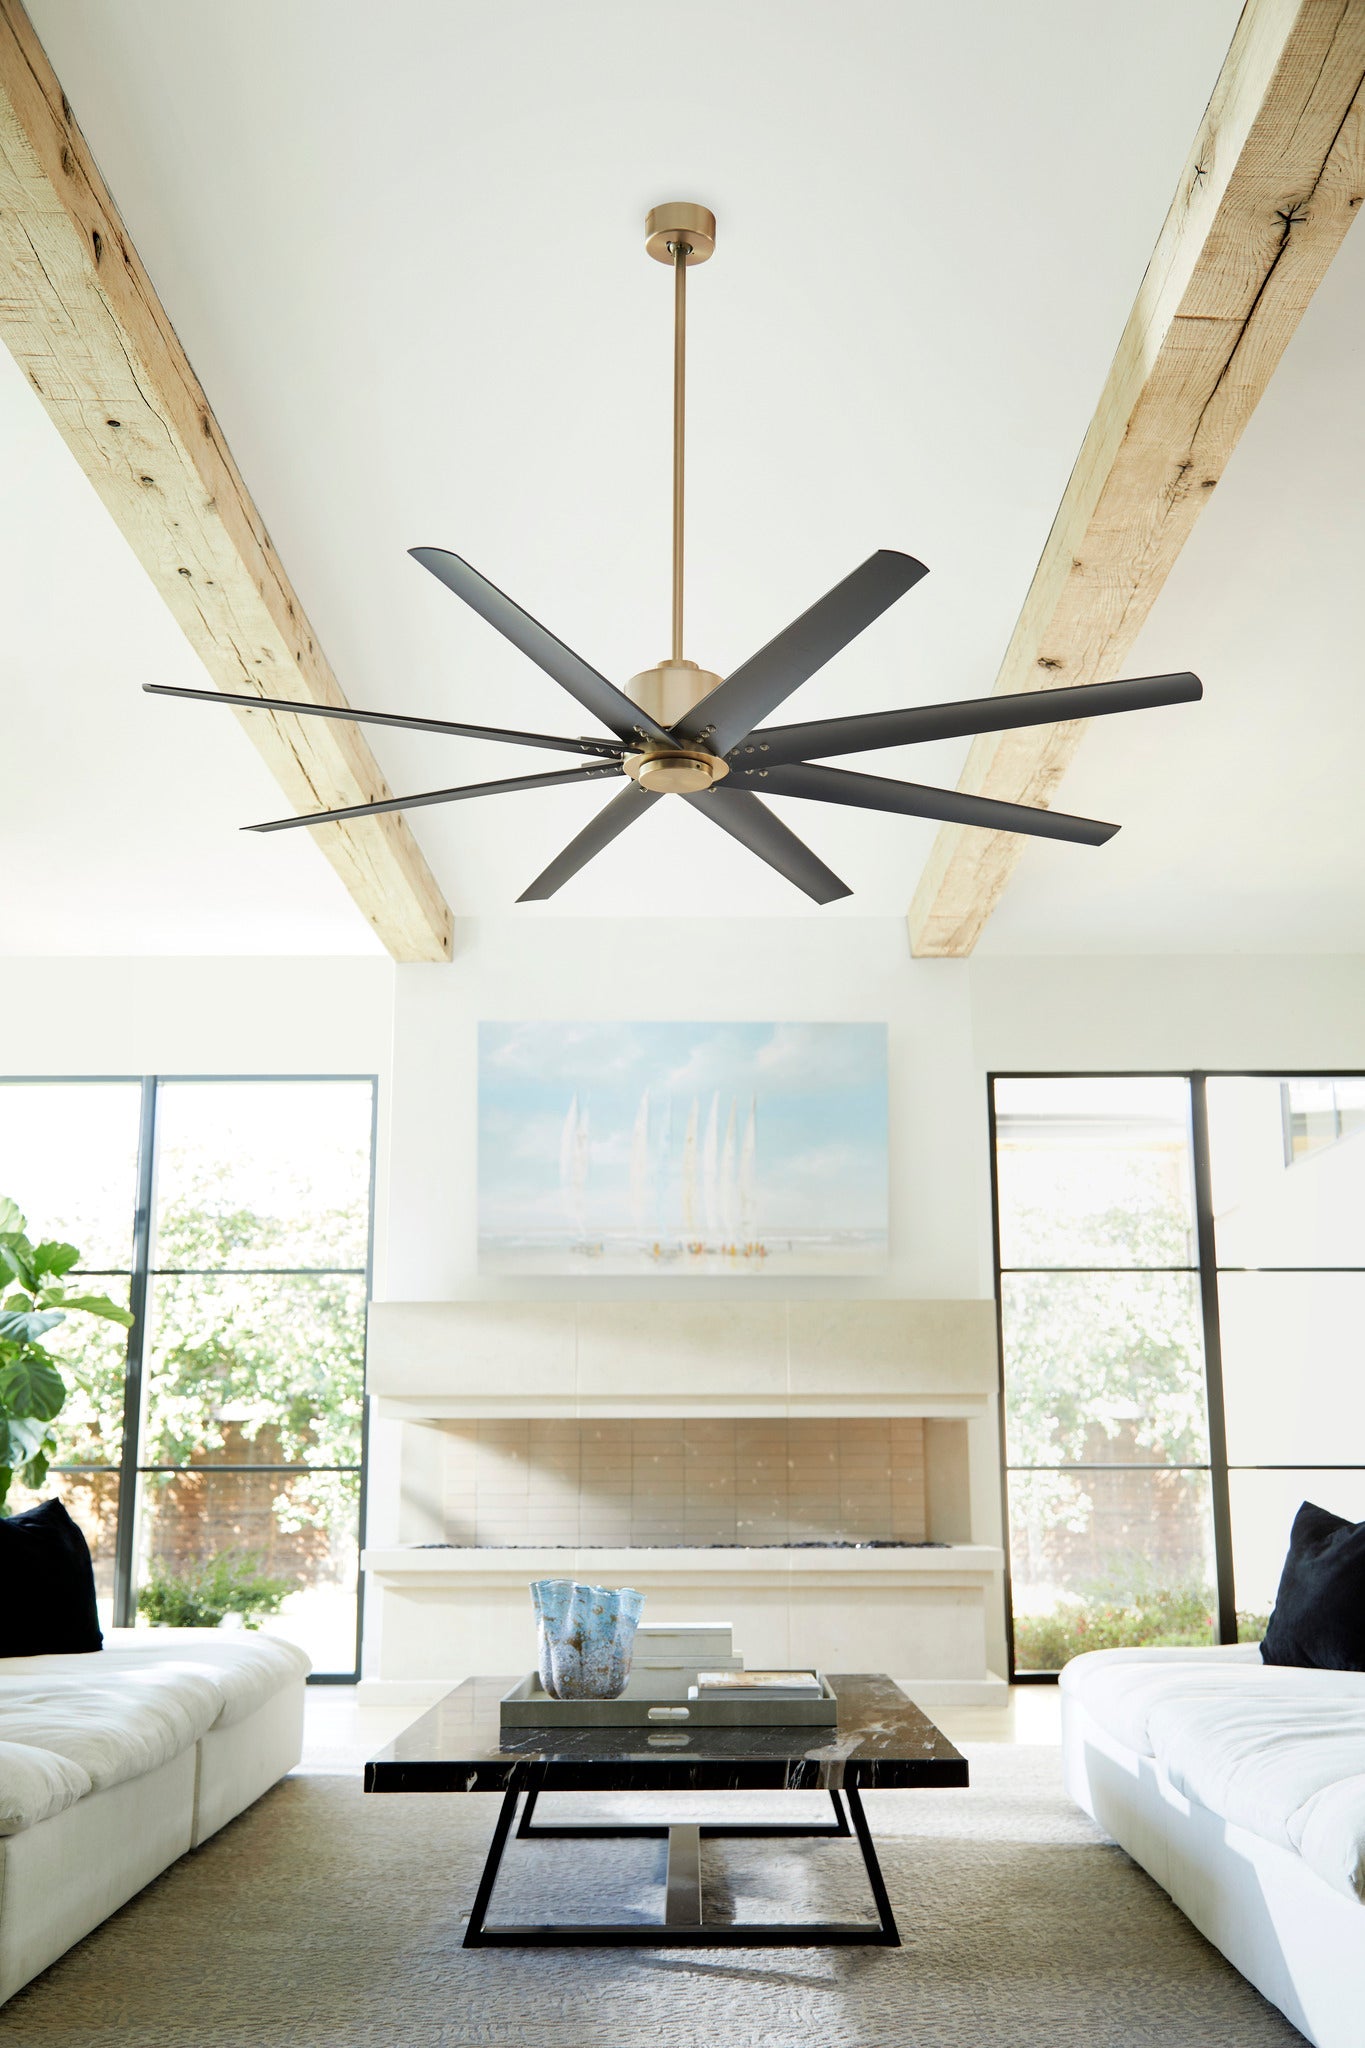 Oxygen FLEET Ceiling Fan 72 Inch Eight Blade Fan - 6 Speed Reversible with Remote and Optional LED Light Kit, Damp Rated